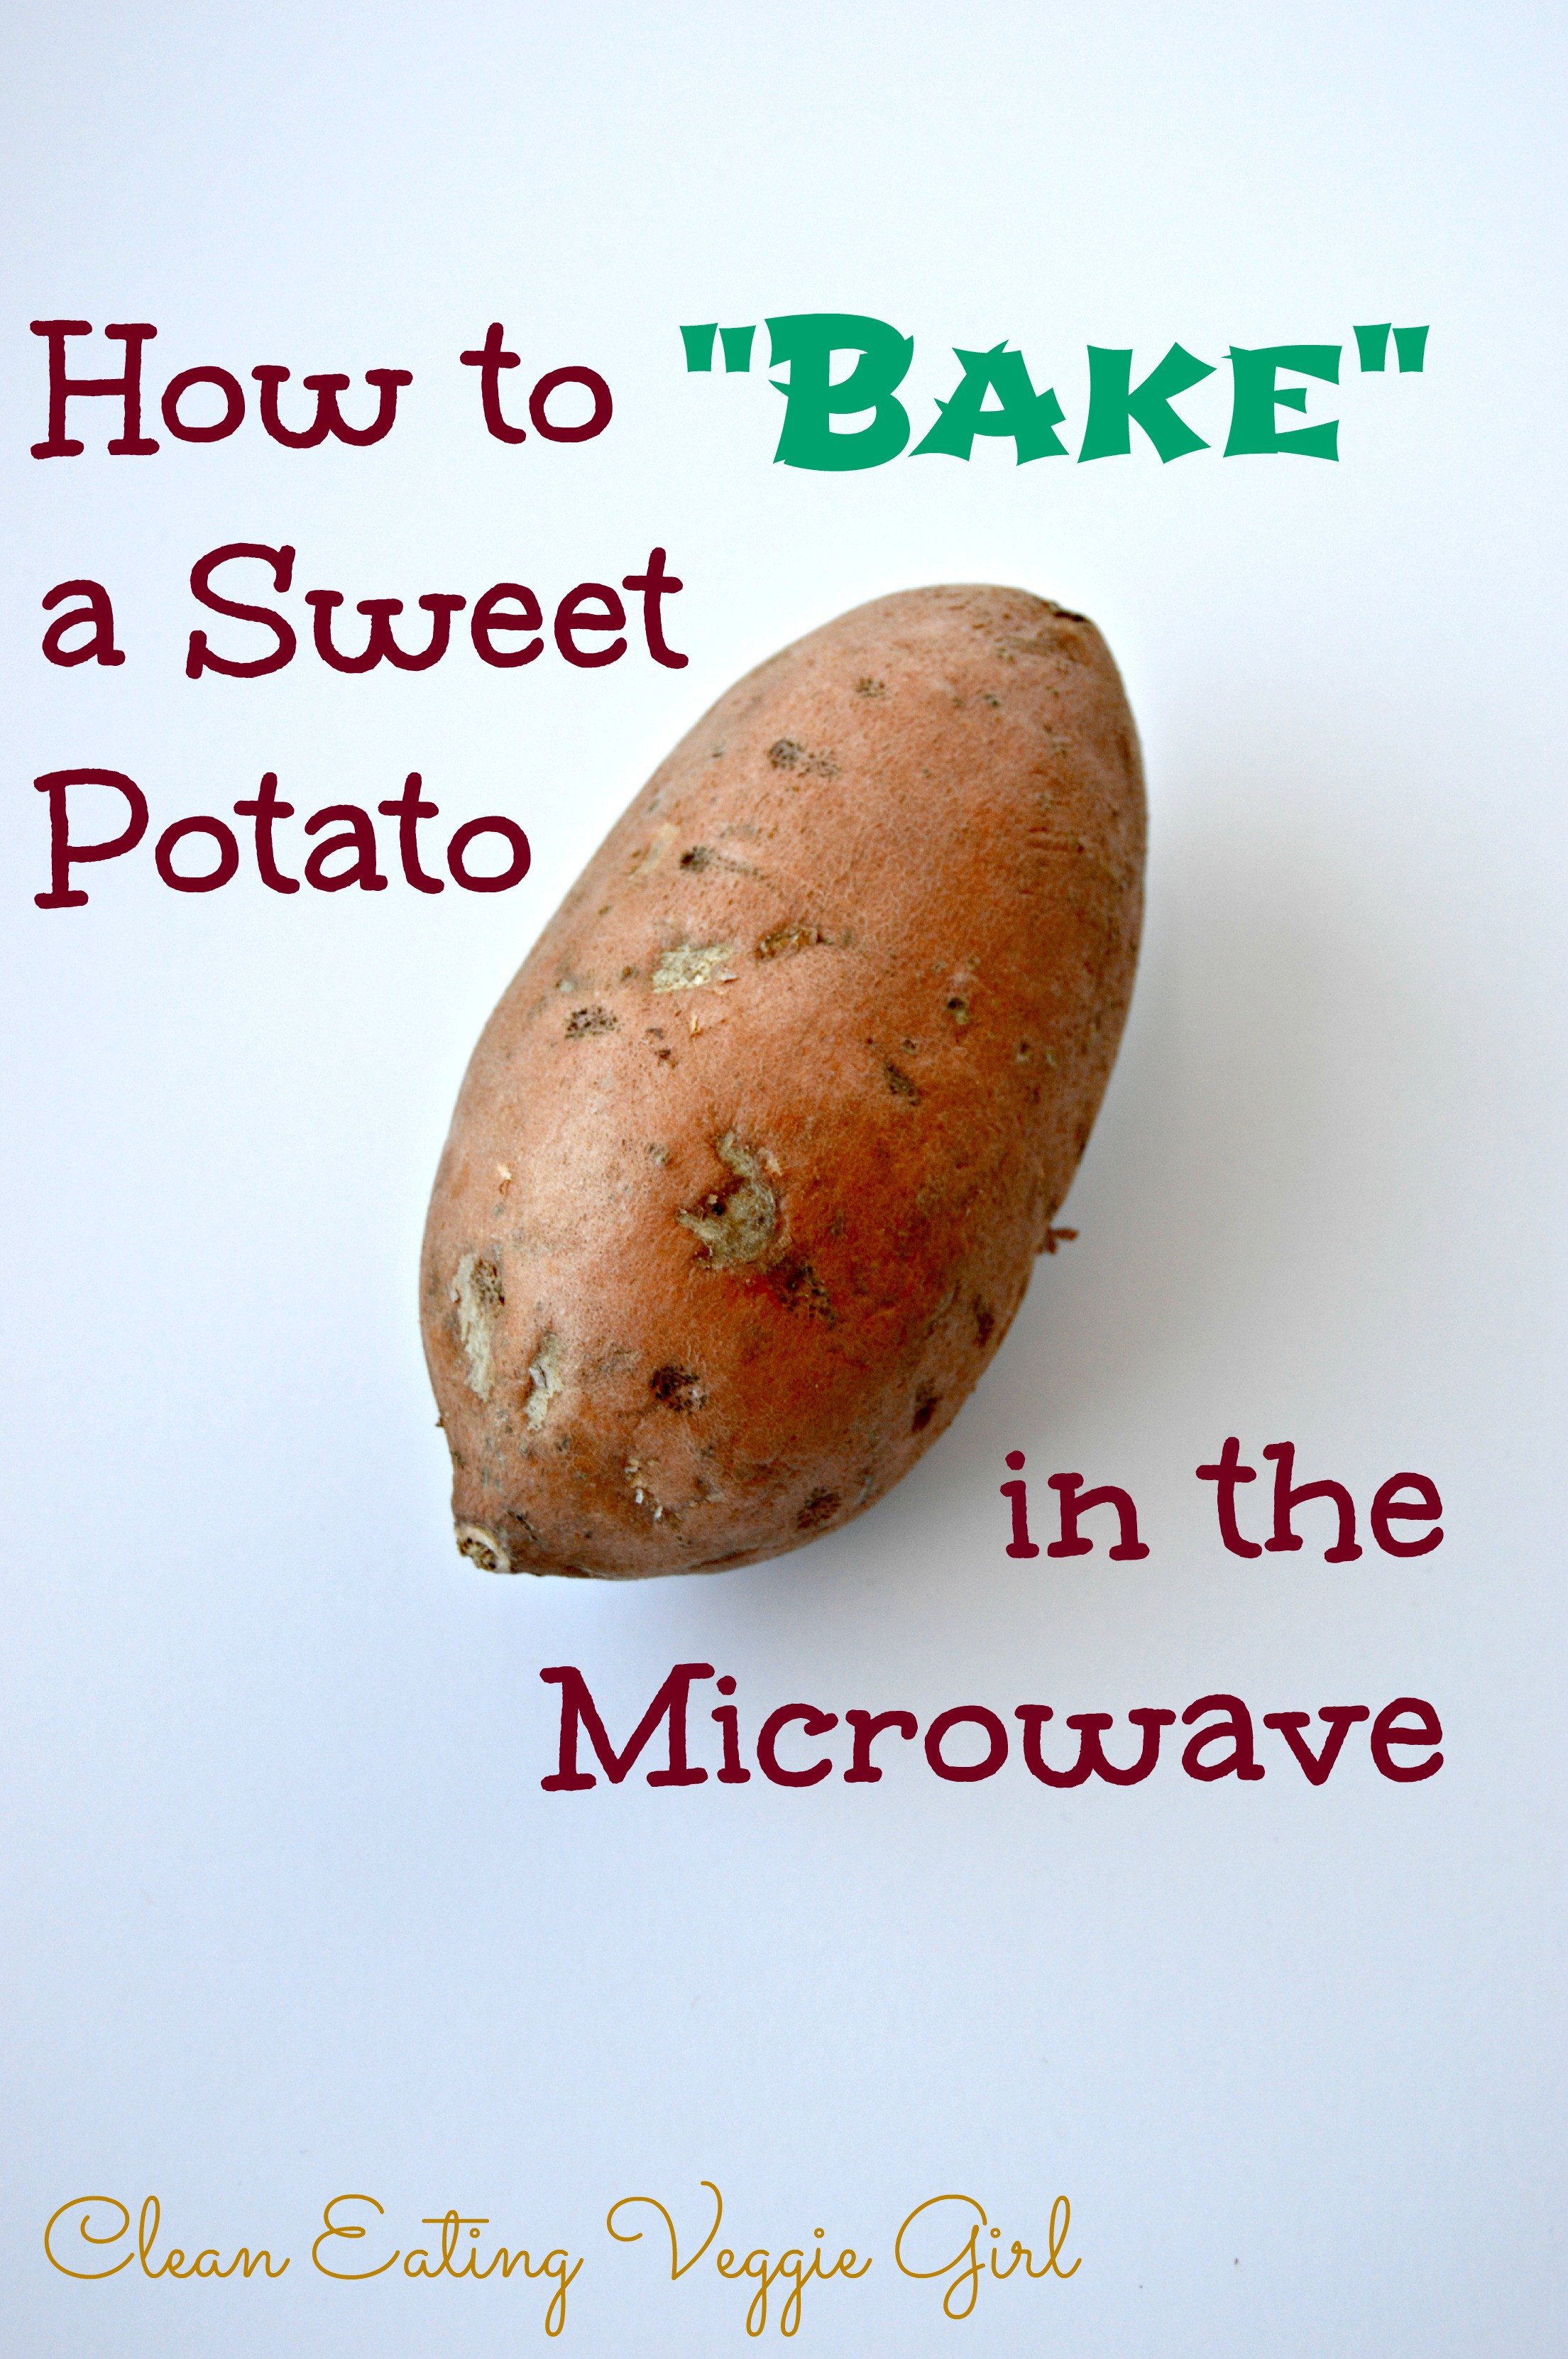 How To Bake A Potato In A Microwave
 How to Make a Baked Sweet Potato in the Microwave Clean